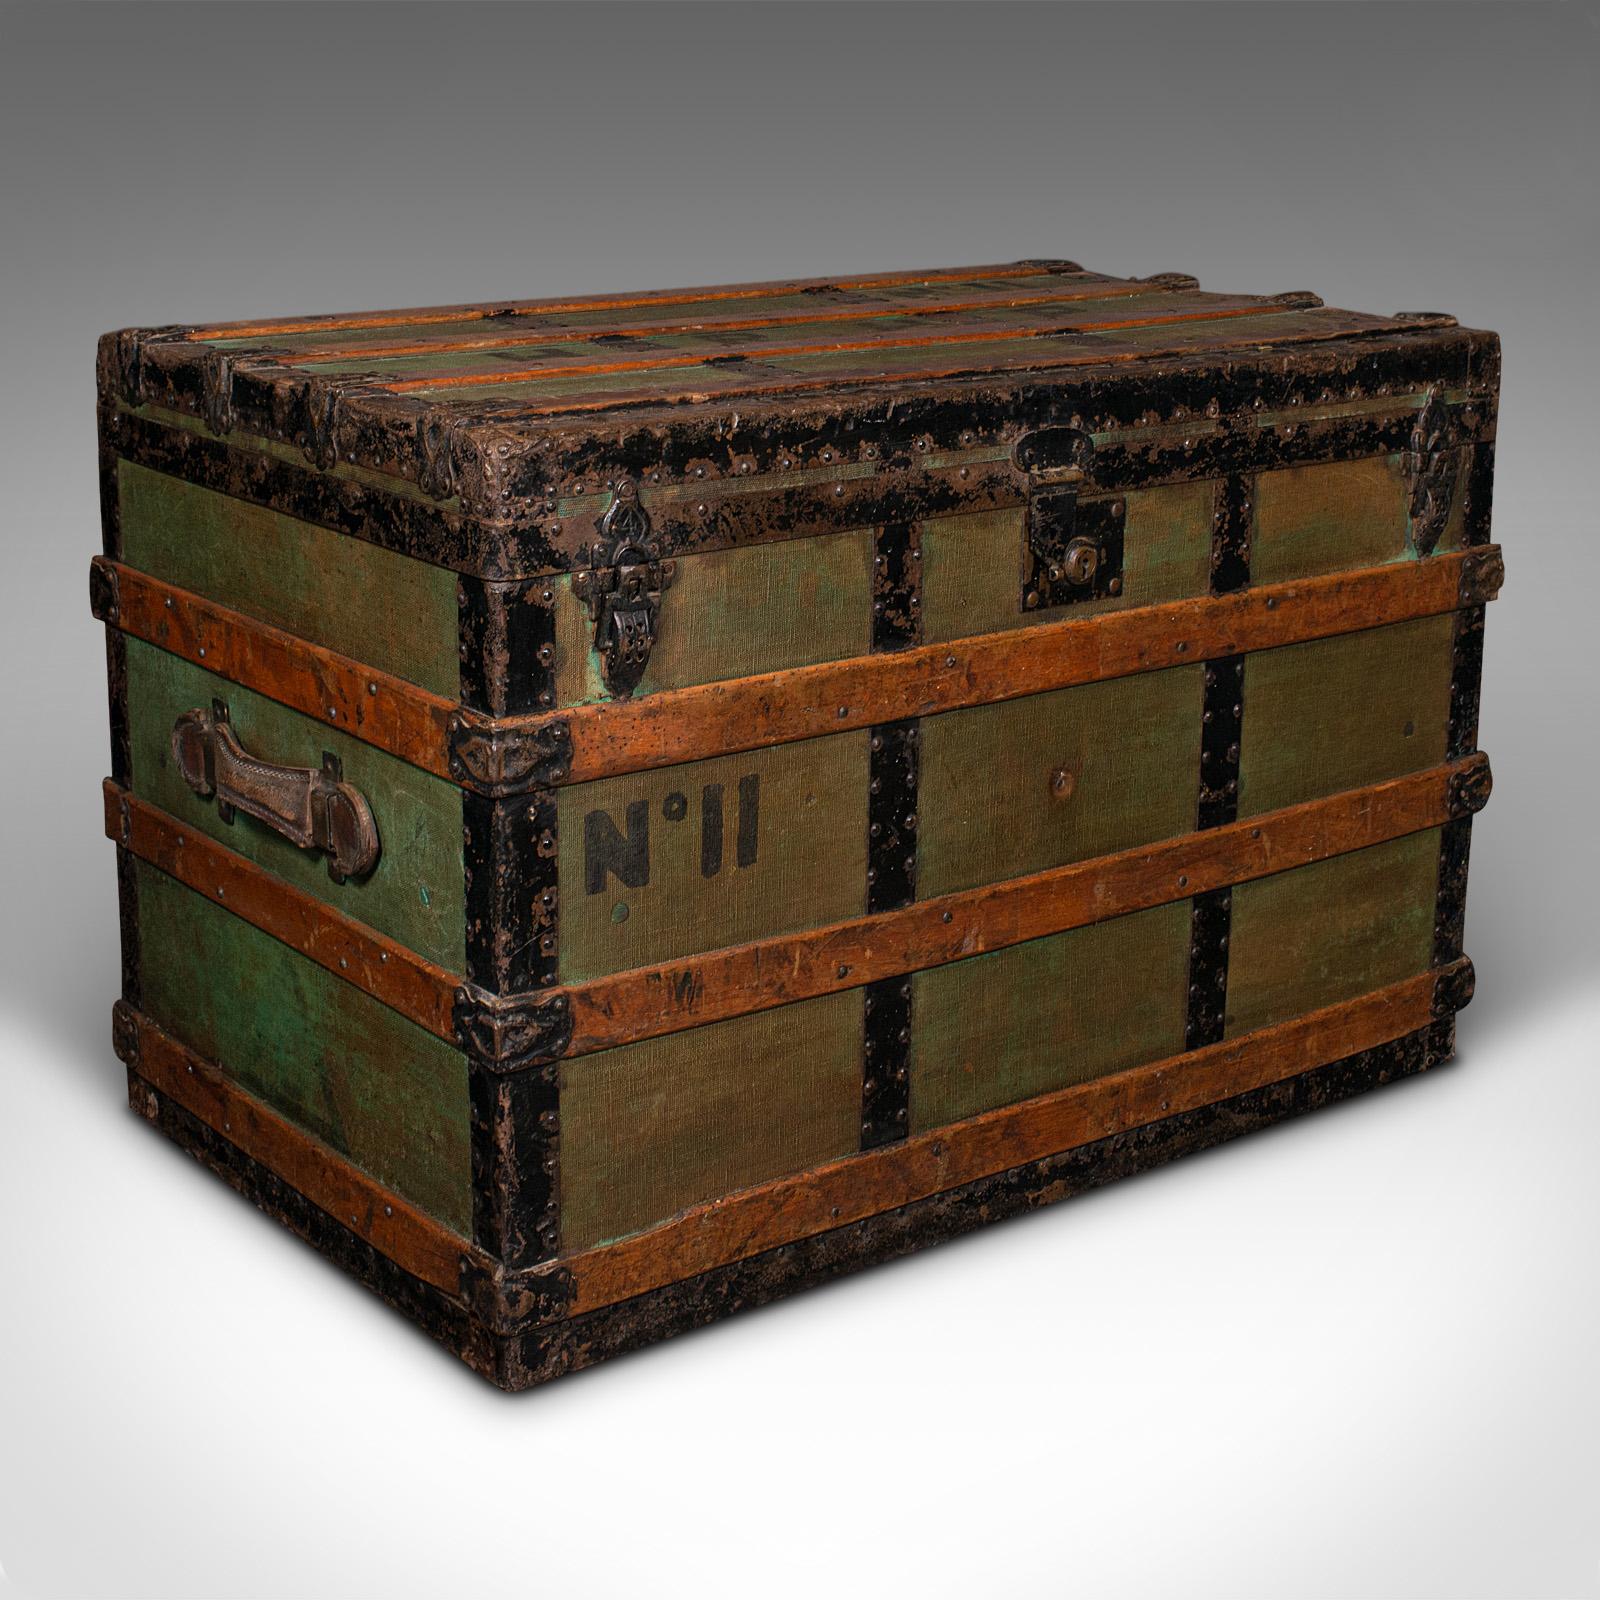 This is a large antique steamer trunk. A Scottish, canvas and beech bound shipping chest, dating to the late Victorian period, circa 1890.

Superb proportion and delightful fitted interior to this large trunk
Displays a desirable aged patina and